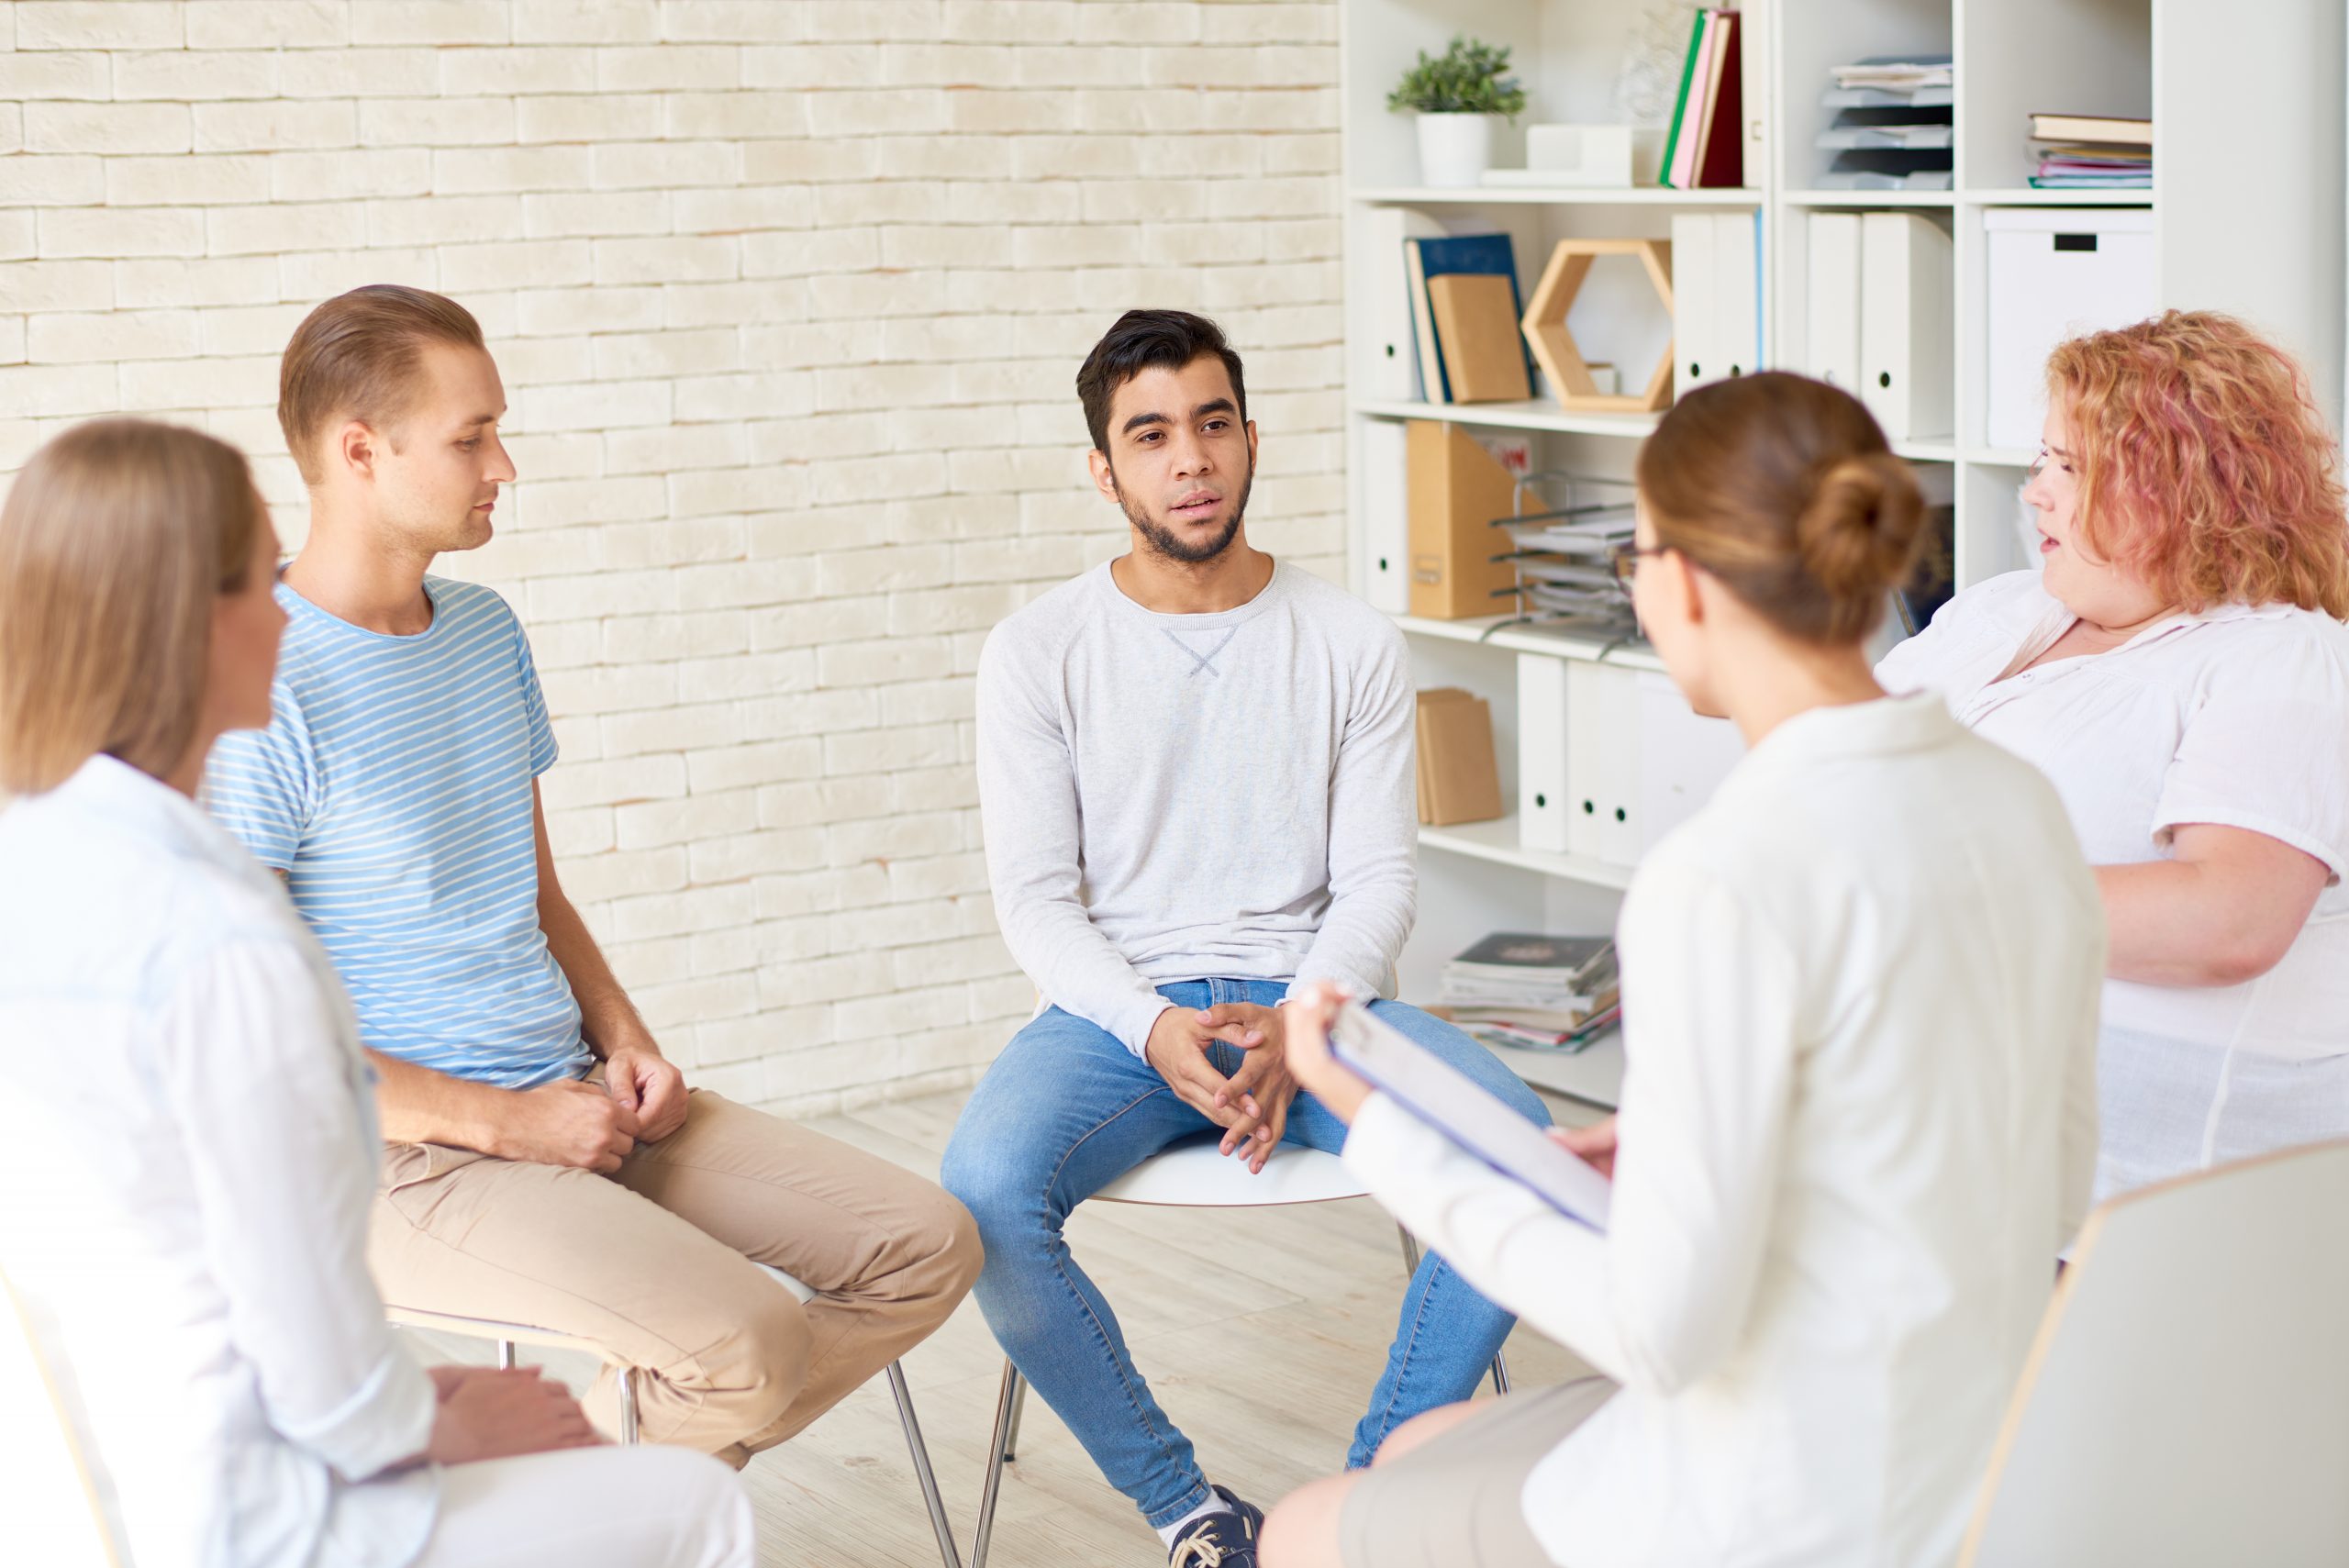 queens group therapy, group psychotherapy near me